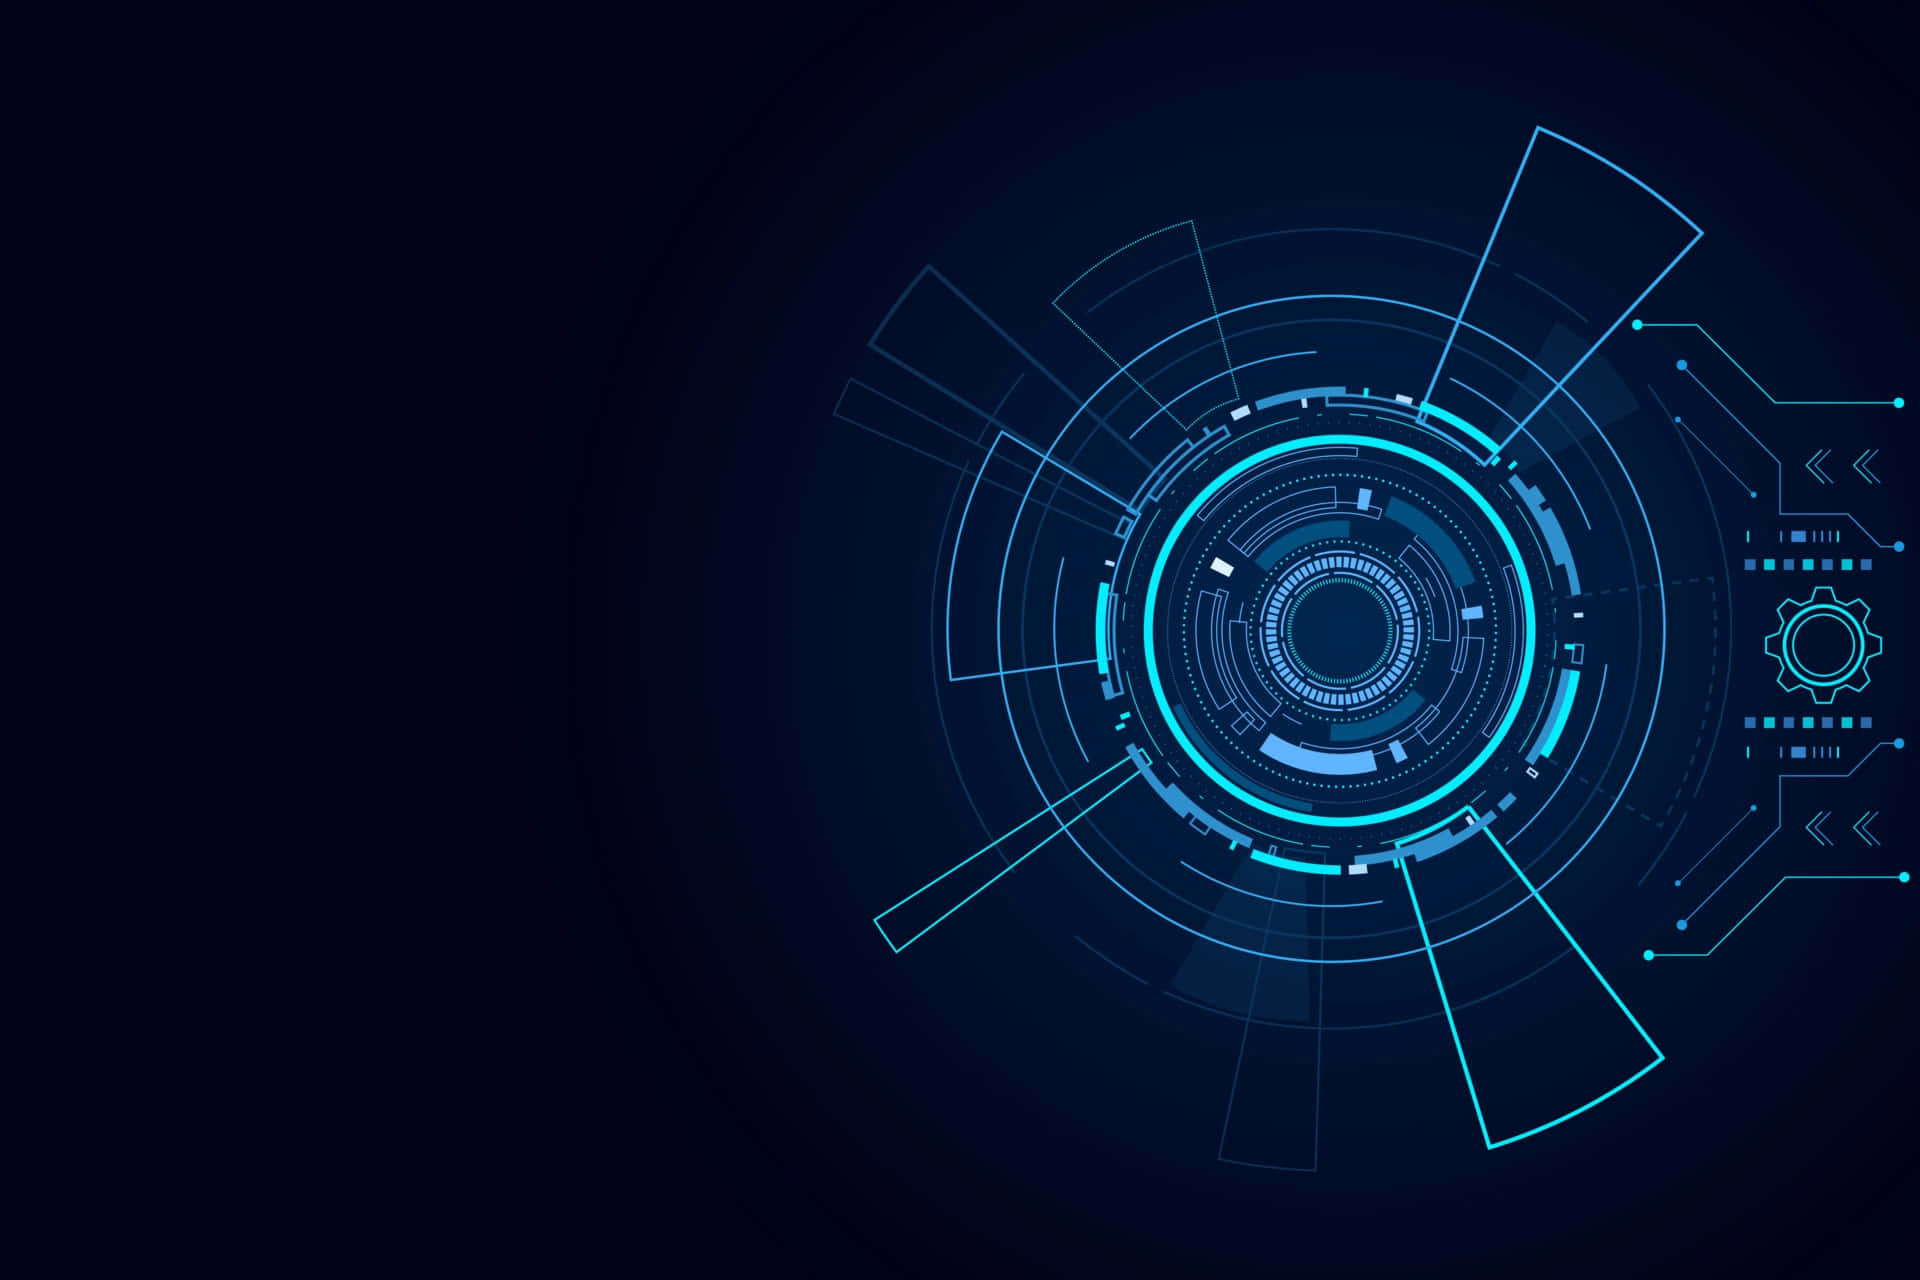 Futuristic Technology Background With Blue Lines And Circles